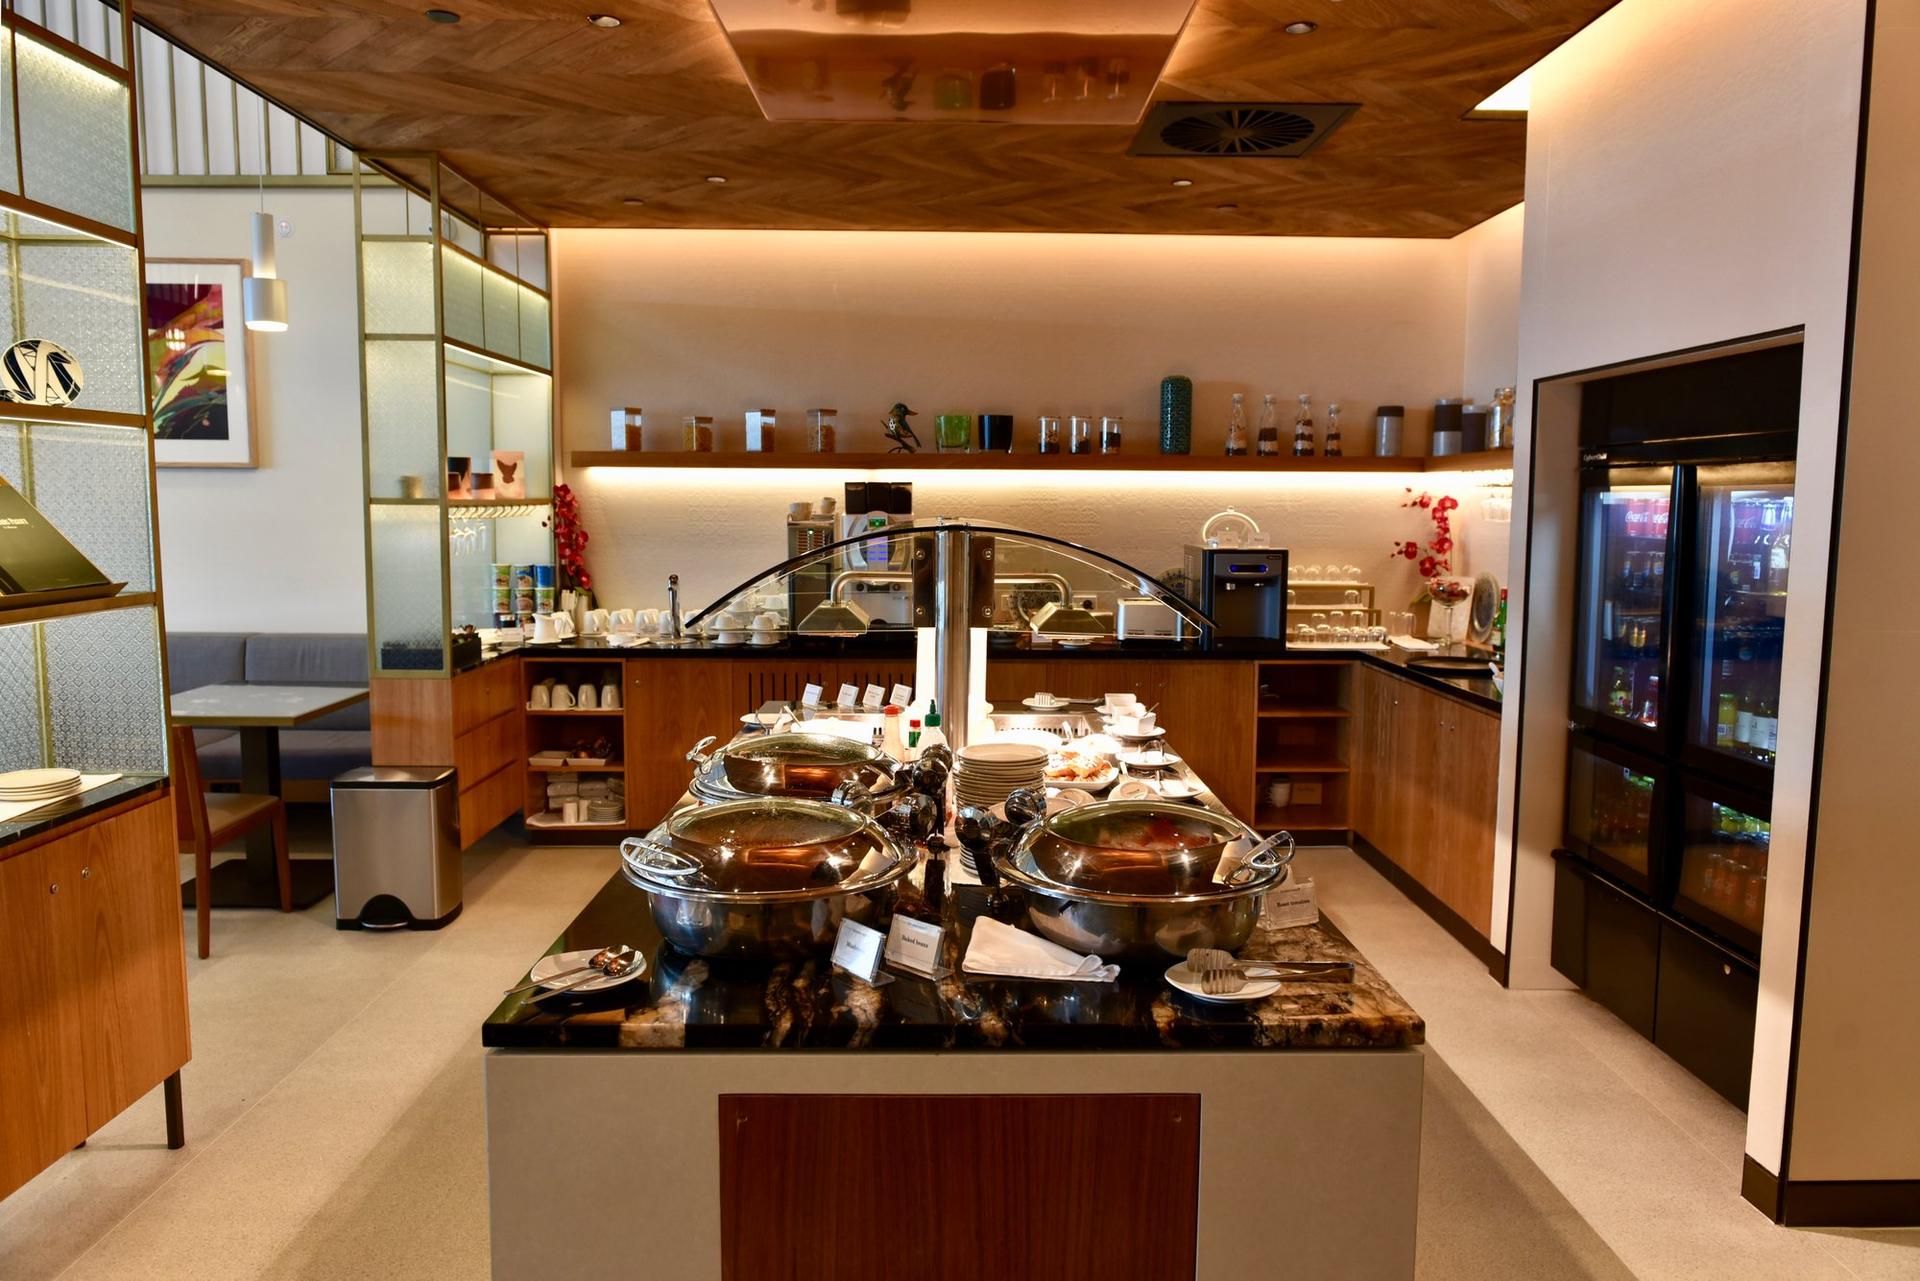 Singapore Airlines SilverKris Lounge image 3 of 3